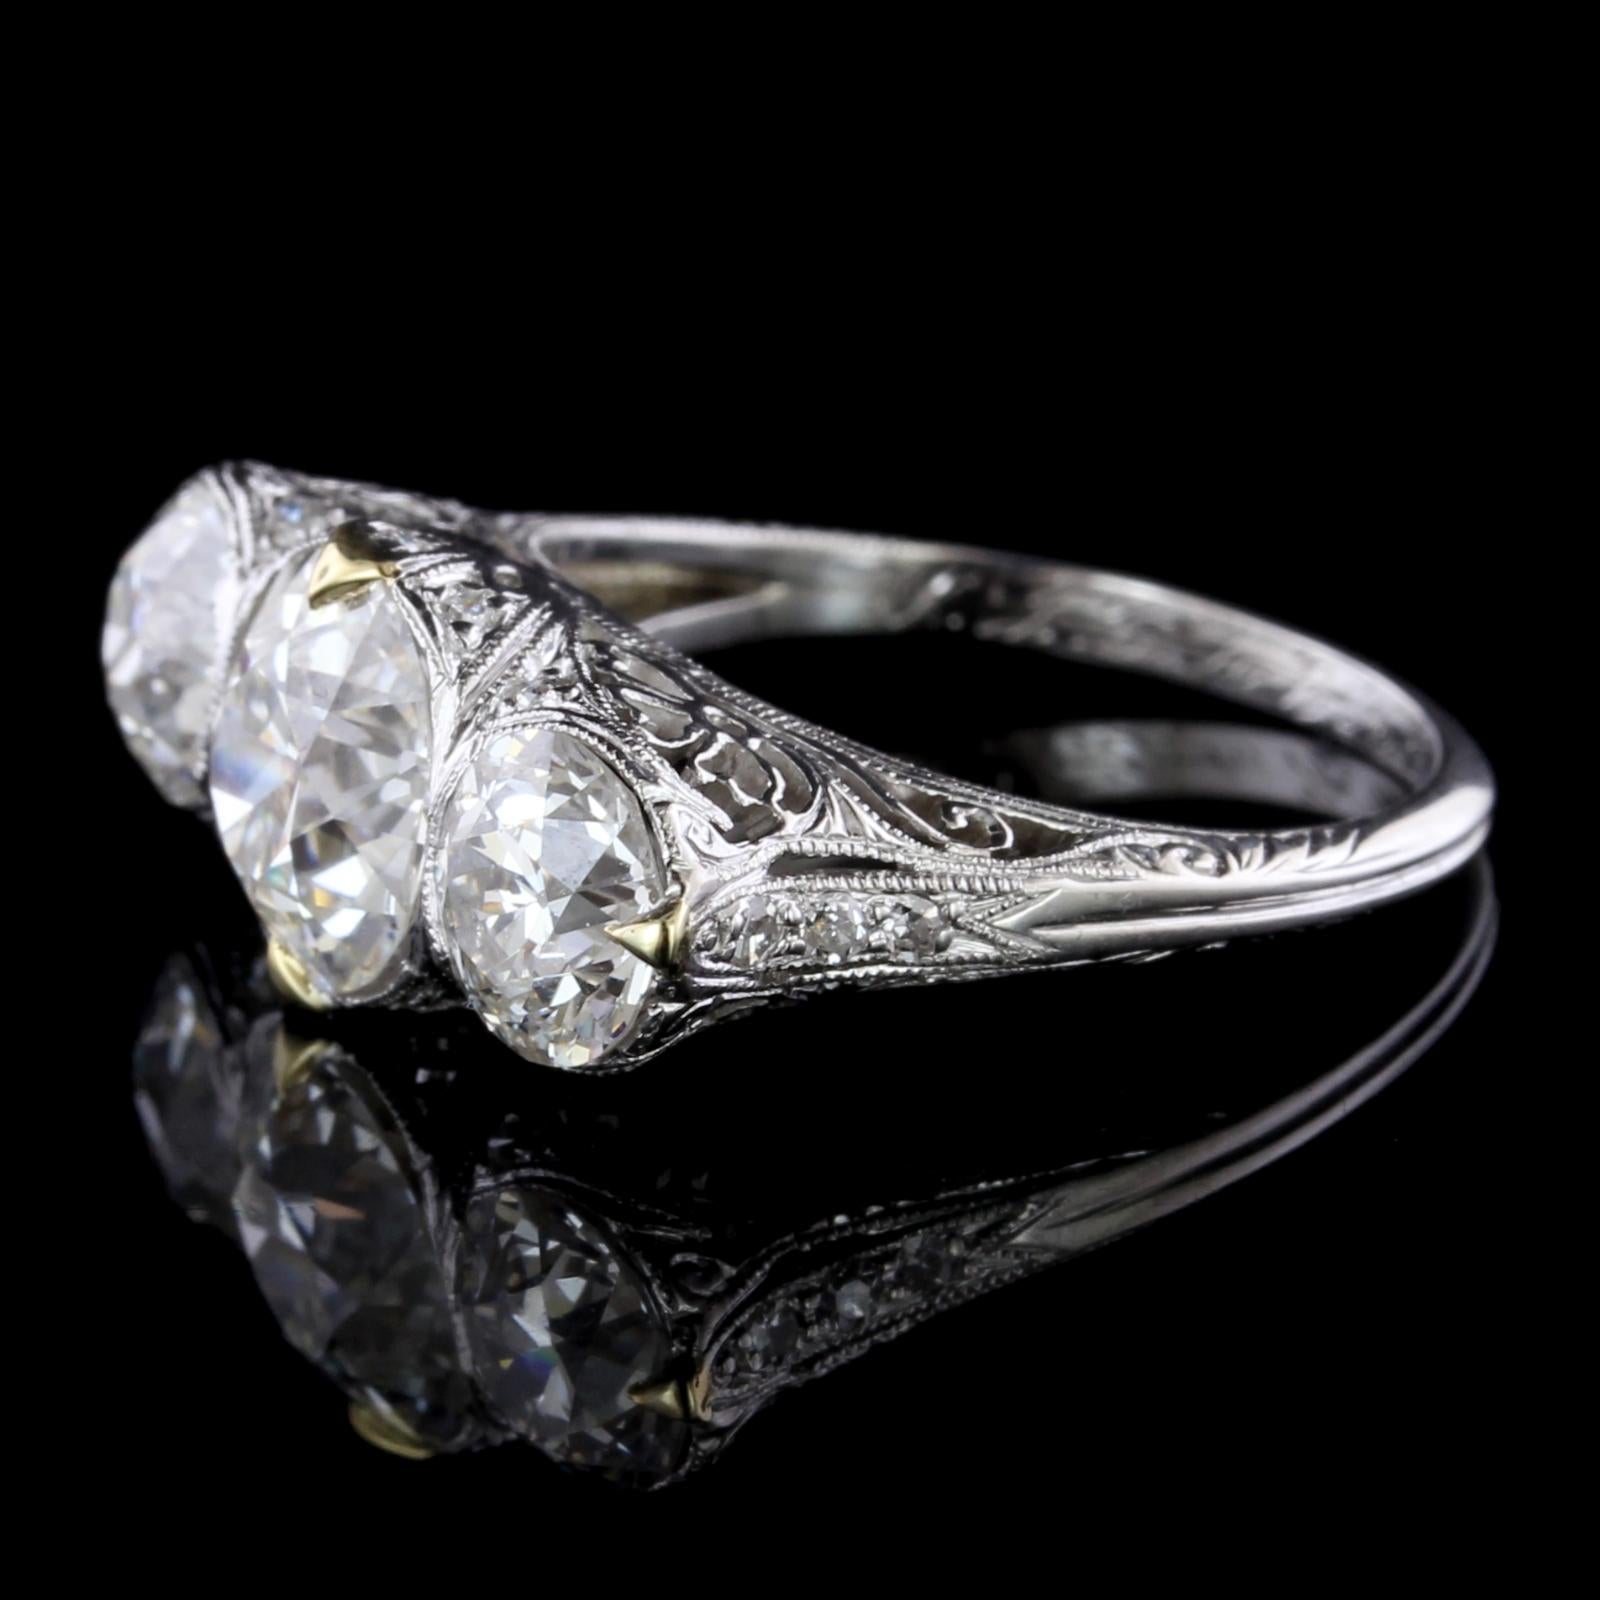 Edwardian Platinum Diamond Three Stone Ring. The ring is set with one old
European cut diamond weighing 1.94cts., I color, VS1 clarity, GIA #1196513406, one old European
cut diamond weighing .89cts., H color, VS2 clarity, GIA #2193513638, and one